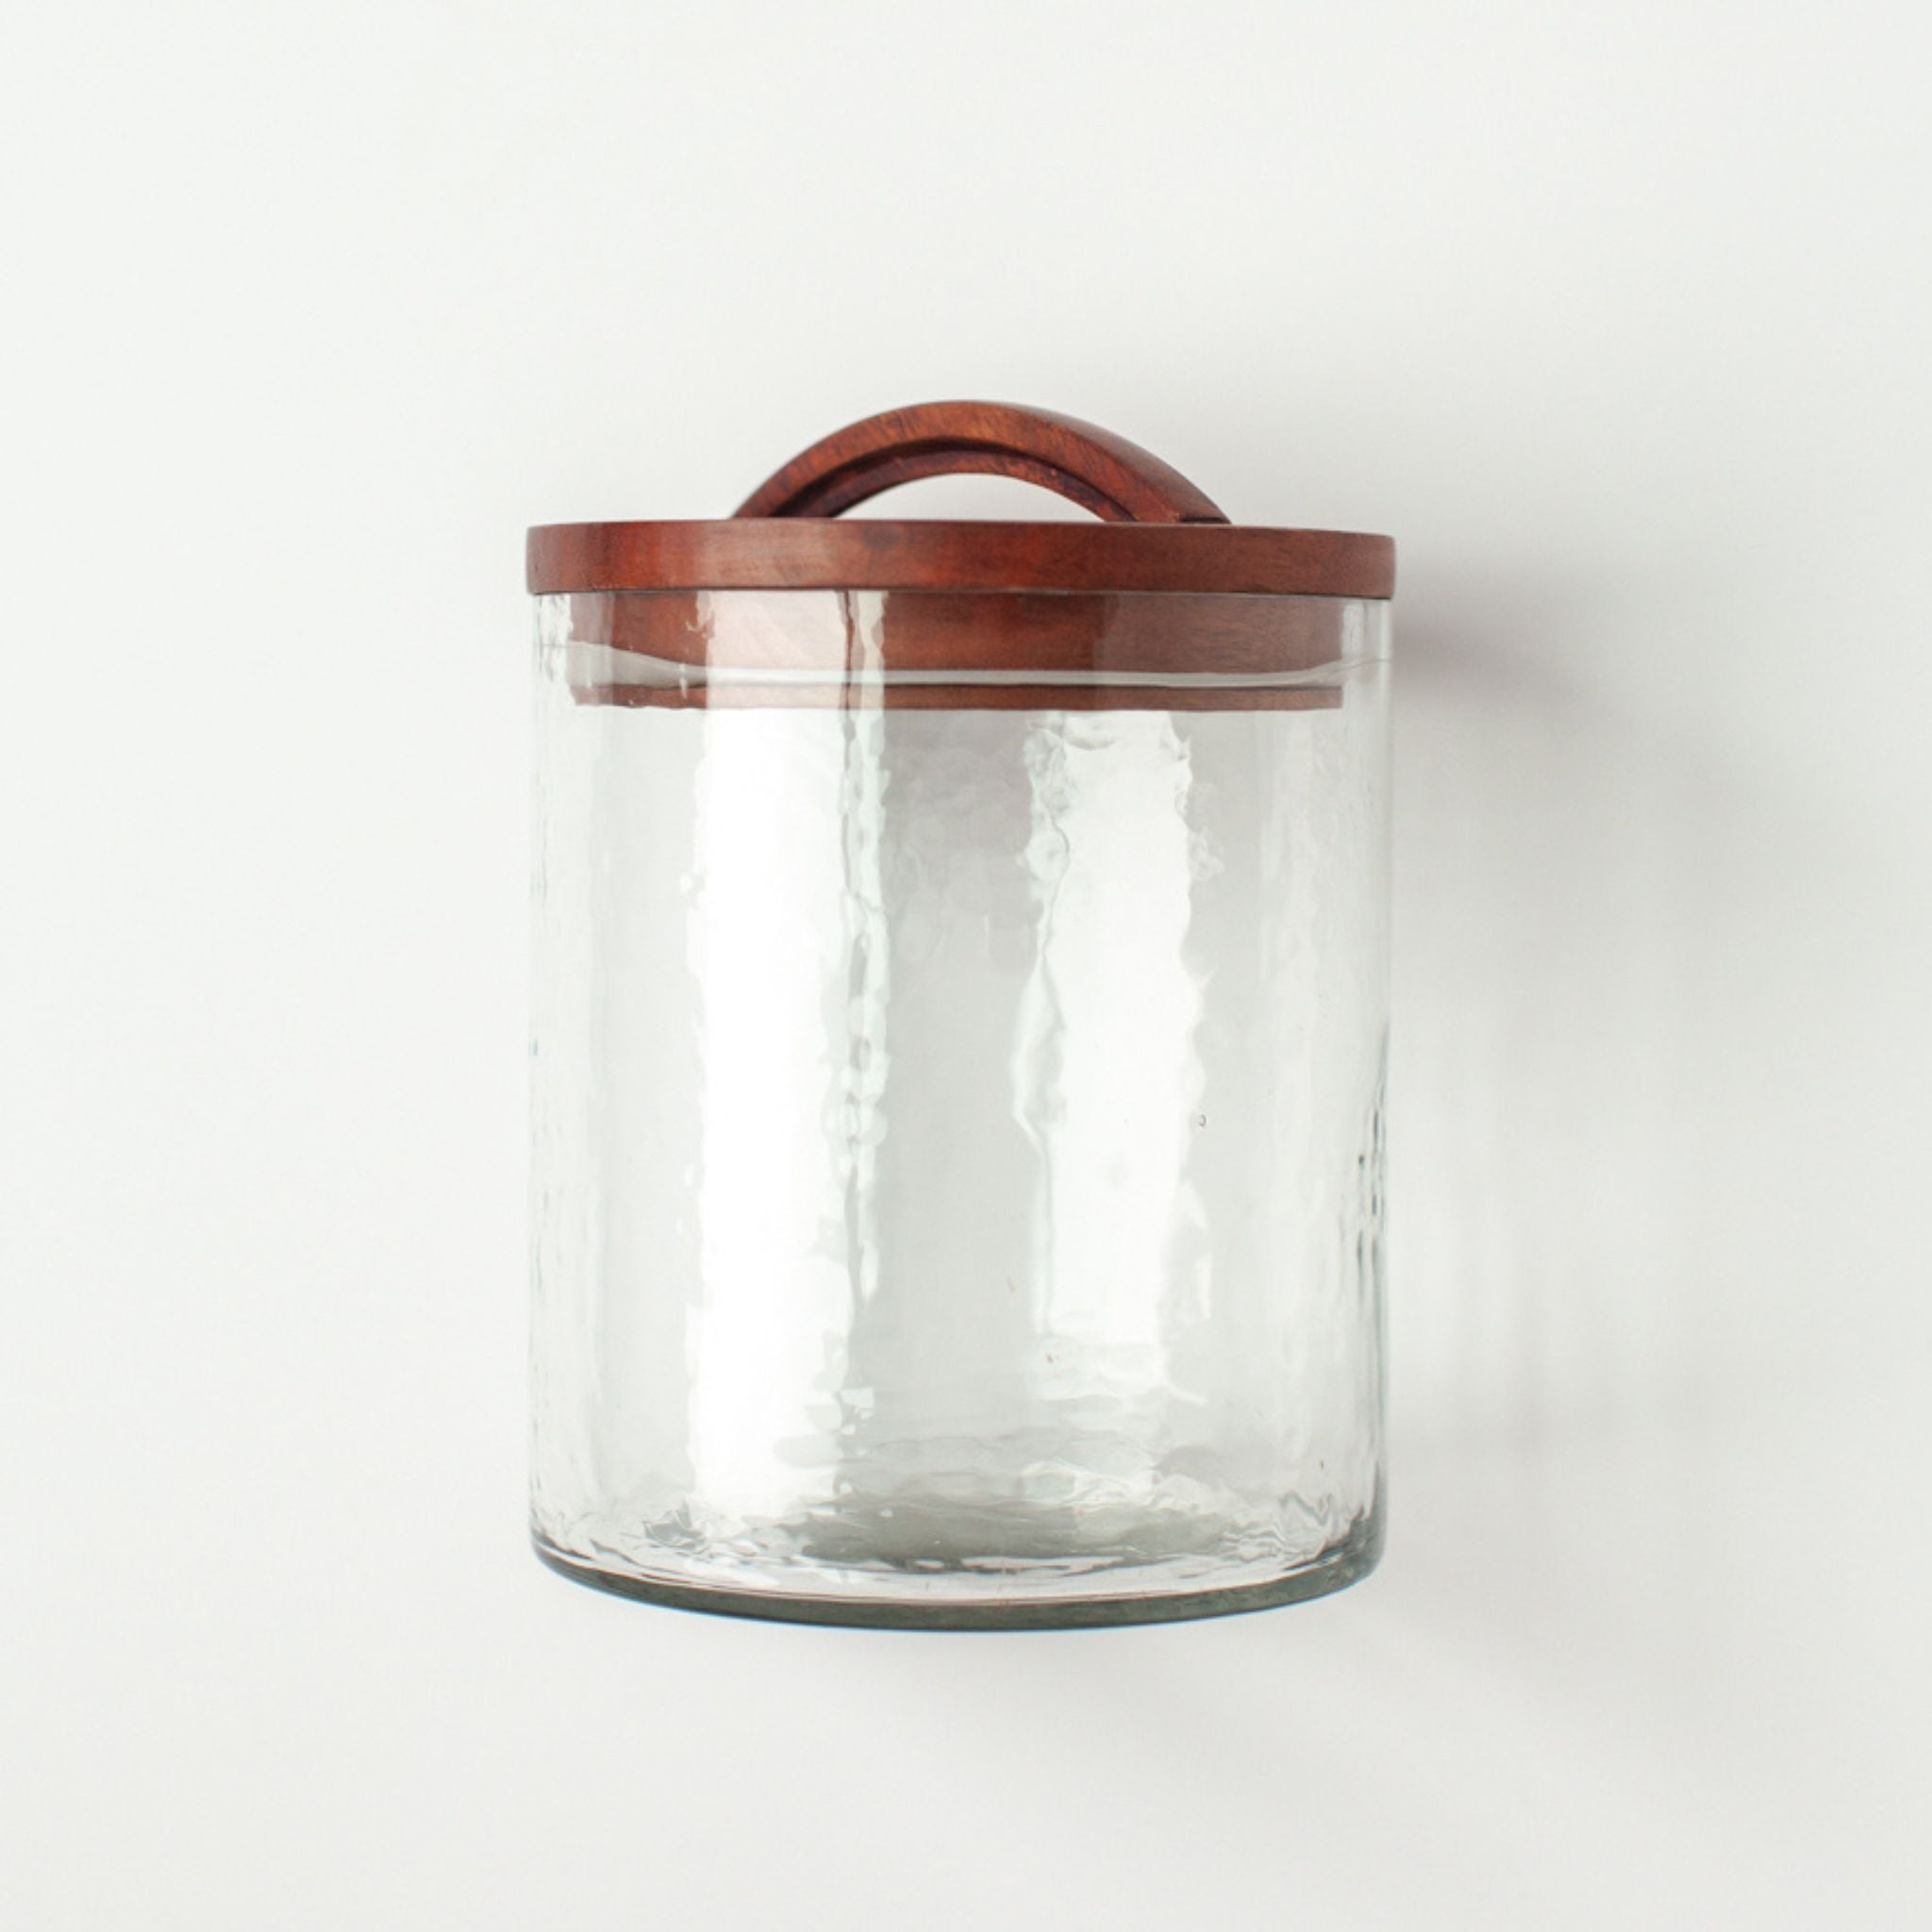 Handblown Hammered Glass Canisters